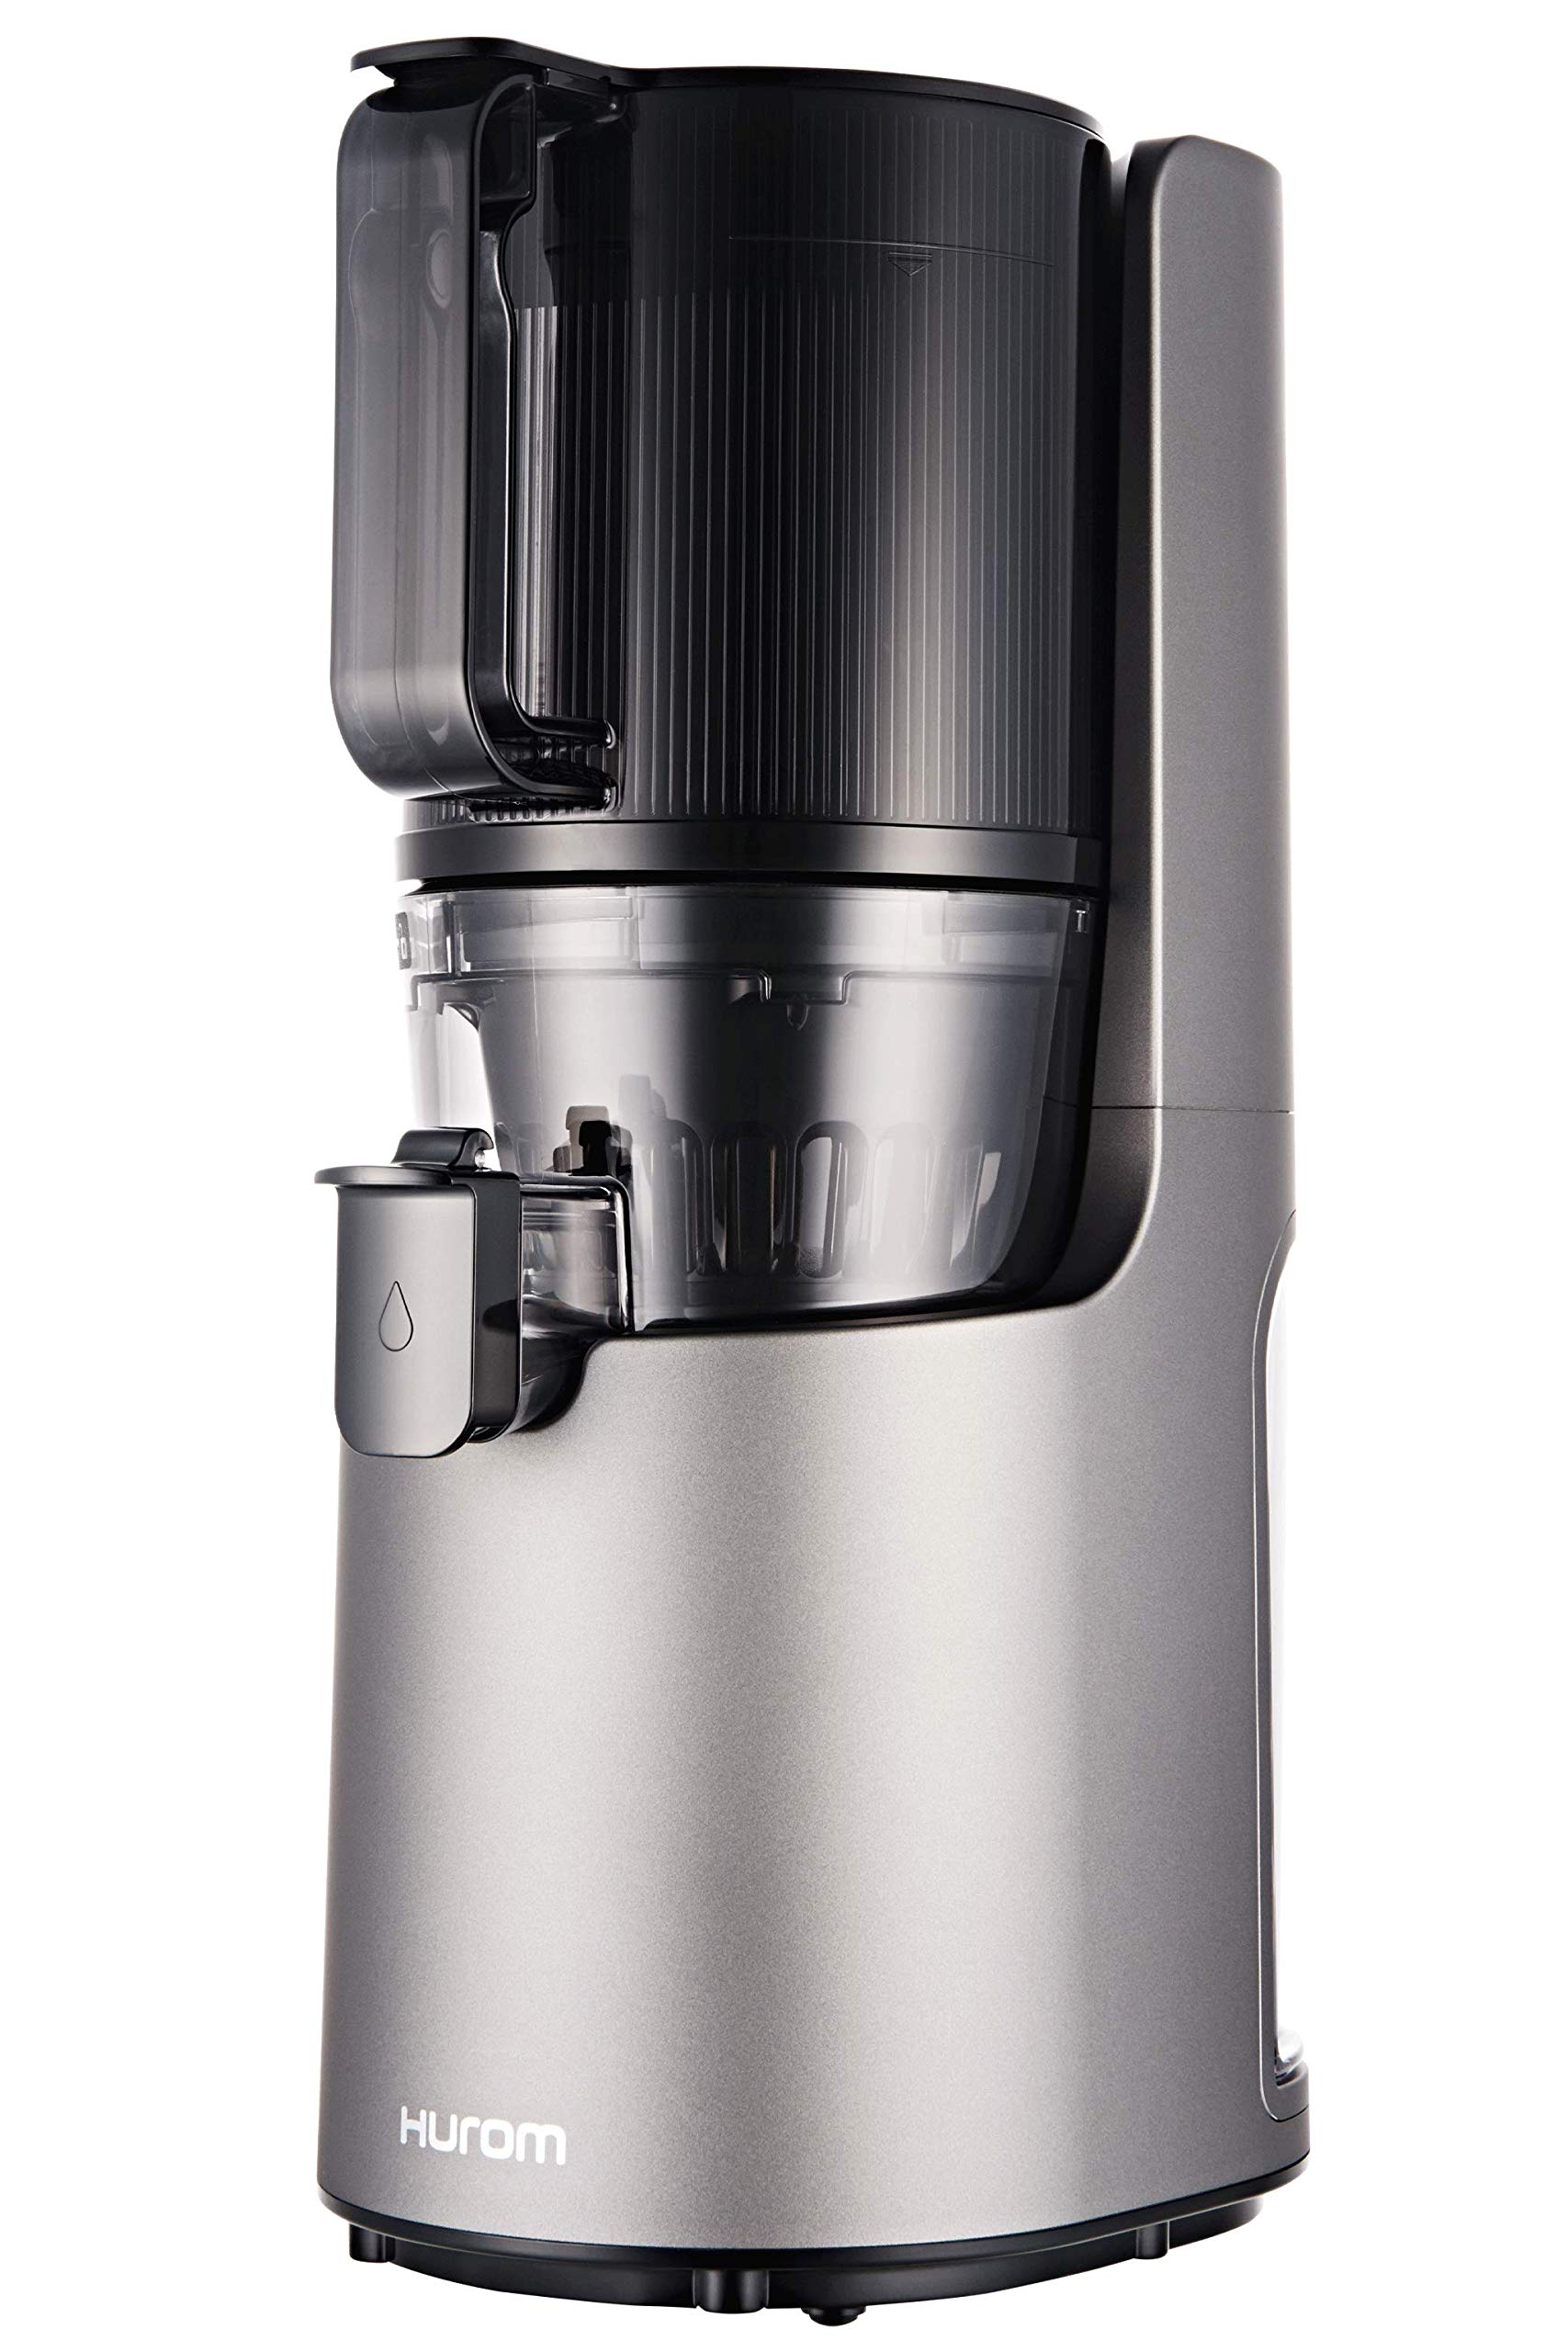 Hurom H-200 Easy clean Model (Silver)